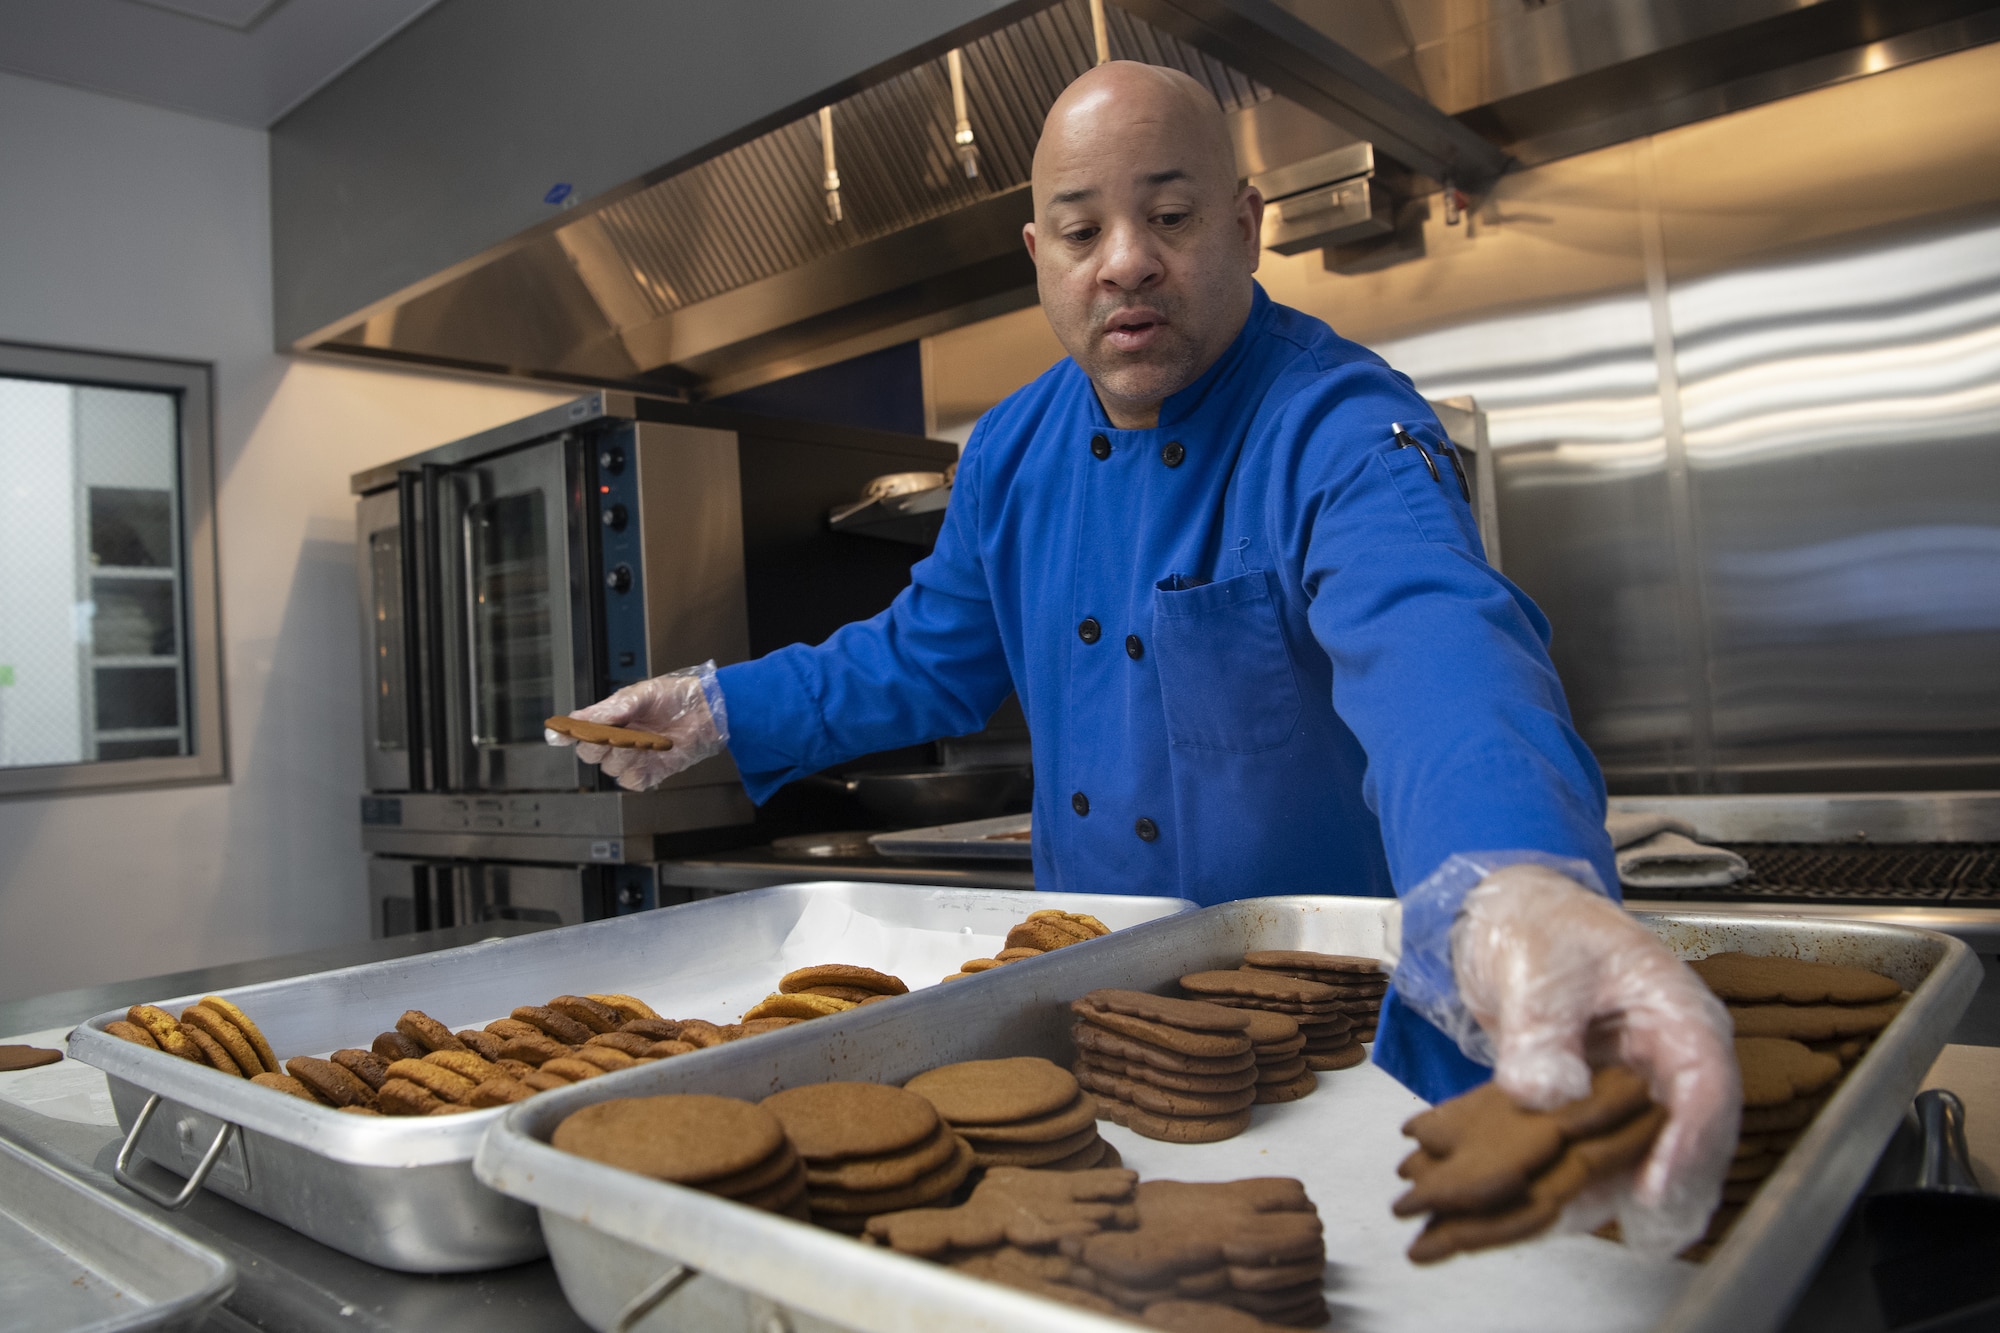 Barry Oxendine, Yokota High School culinary arts teacher, sorts cookies onto trays in preparation for the base’s annual Yokota Cookie Crunch at the Yokota High School located at Yokota Air Base, Japan, Dec. 8, 2022. Over the years, the cookie crunch became an annual event with participants including the Yokota High School, Yokota High School, United Service Organizations and more. This year more than 7,000 cookies have been pledged to the event by members across Yokota. (U.S. Air Force photo by Tech. Sgt. Christopher Hubenthal)